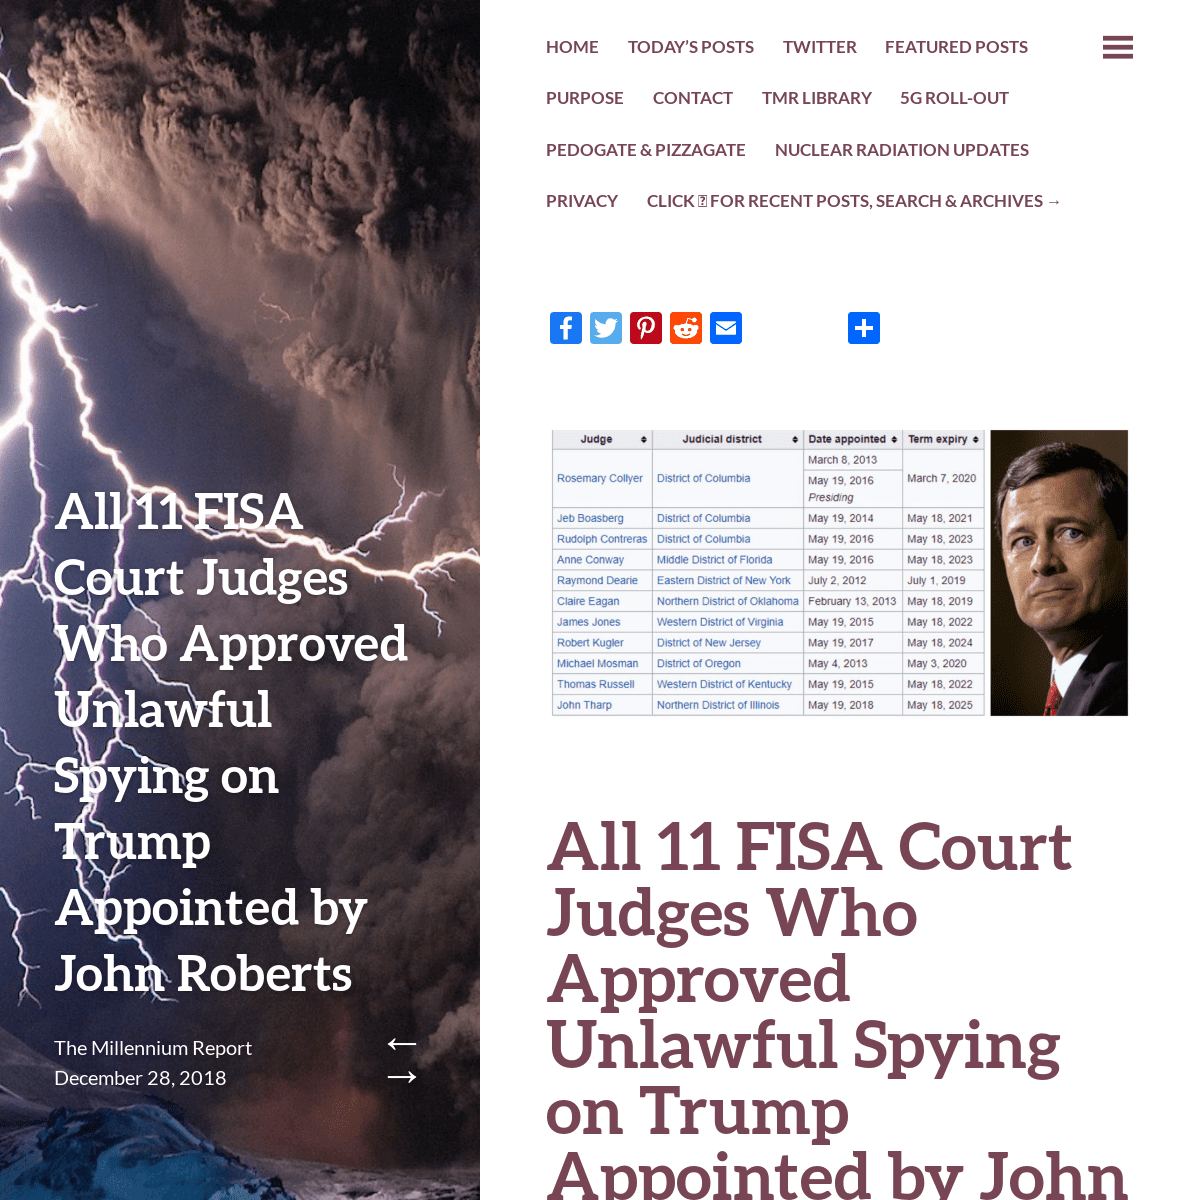 A complete backup of http://themillenniumreport.com/2018/12/all-11-fisa-court-judges-who-approved-unlawful-spying-on-trump-appoi